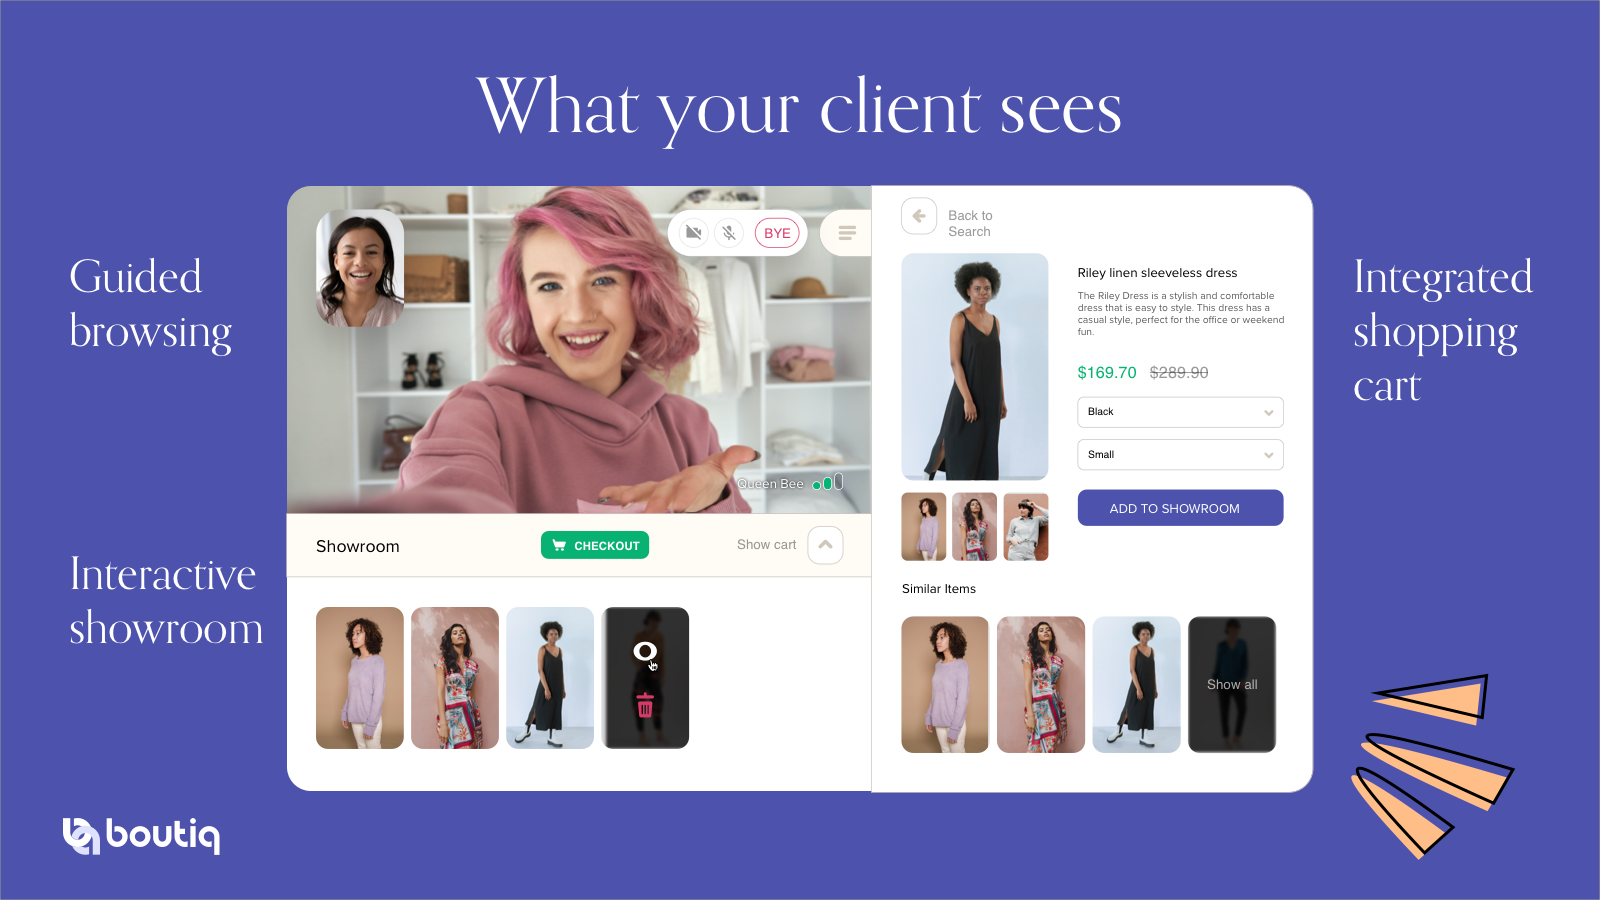 What Your Client Sees - Video-based Shopping Experience